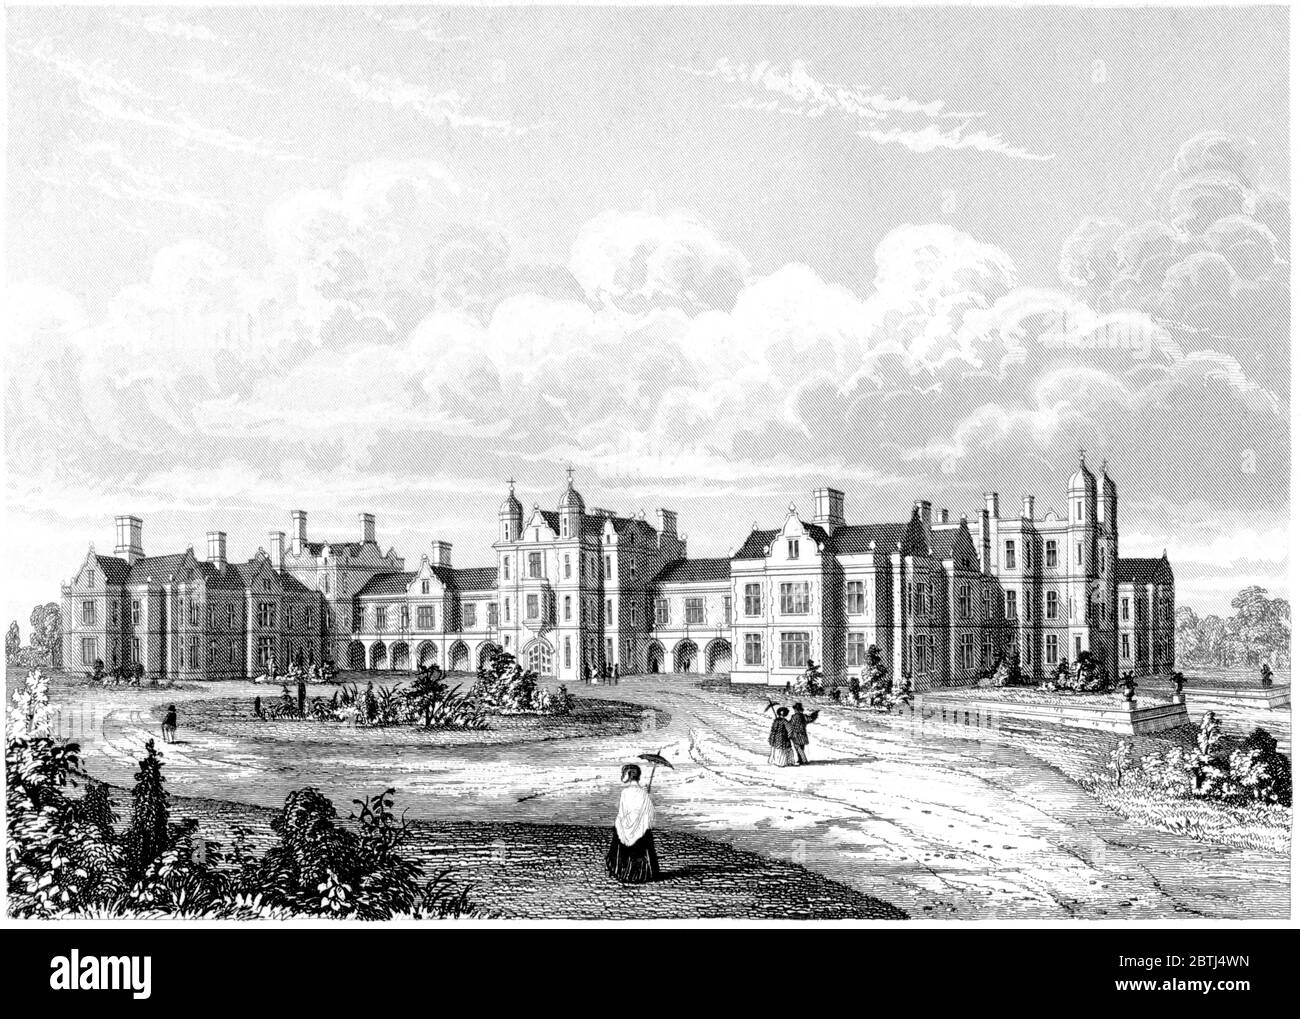 An engraving of The Infant Orphan Asylum Wanstead scanned at high resolution from a book printed in 1851.  Believed copyright free. Stock Photo